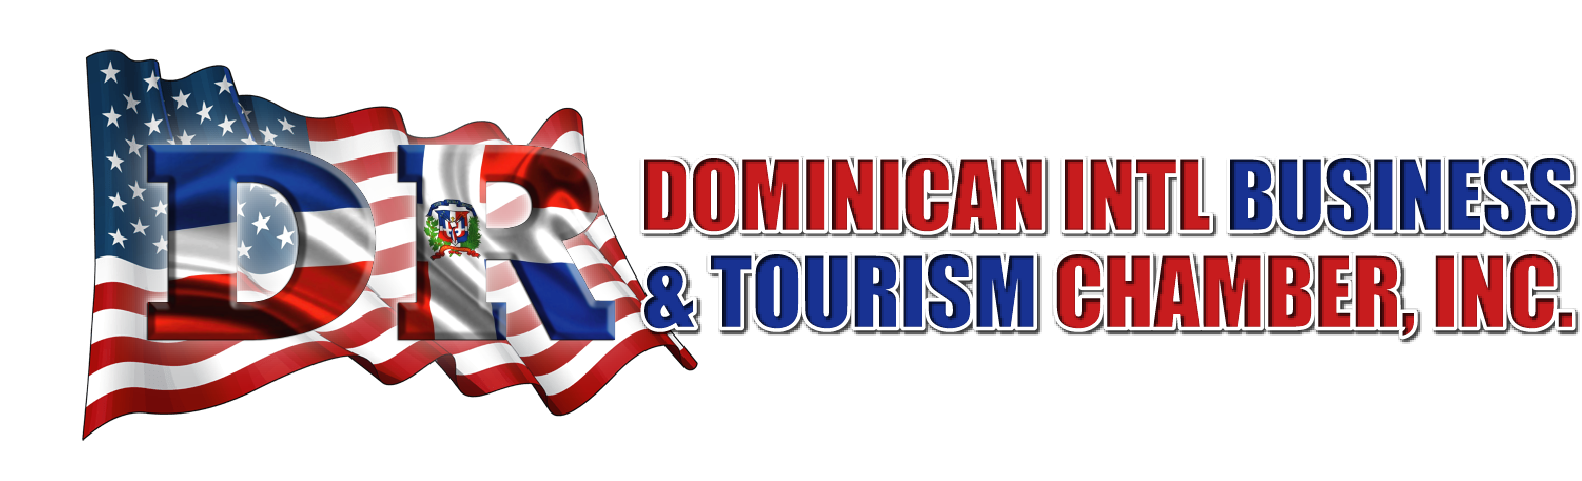 DOMINICAN INTL BUSINESS & TOURISM CHAMBER, INC.